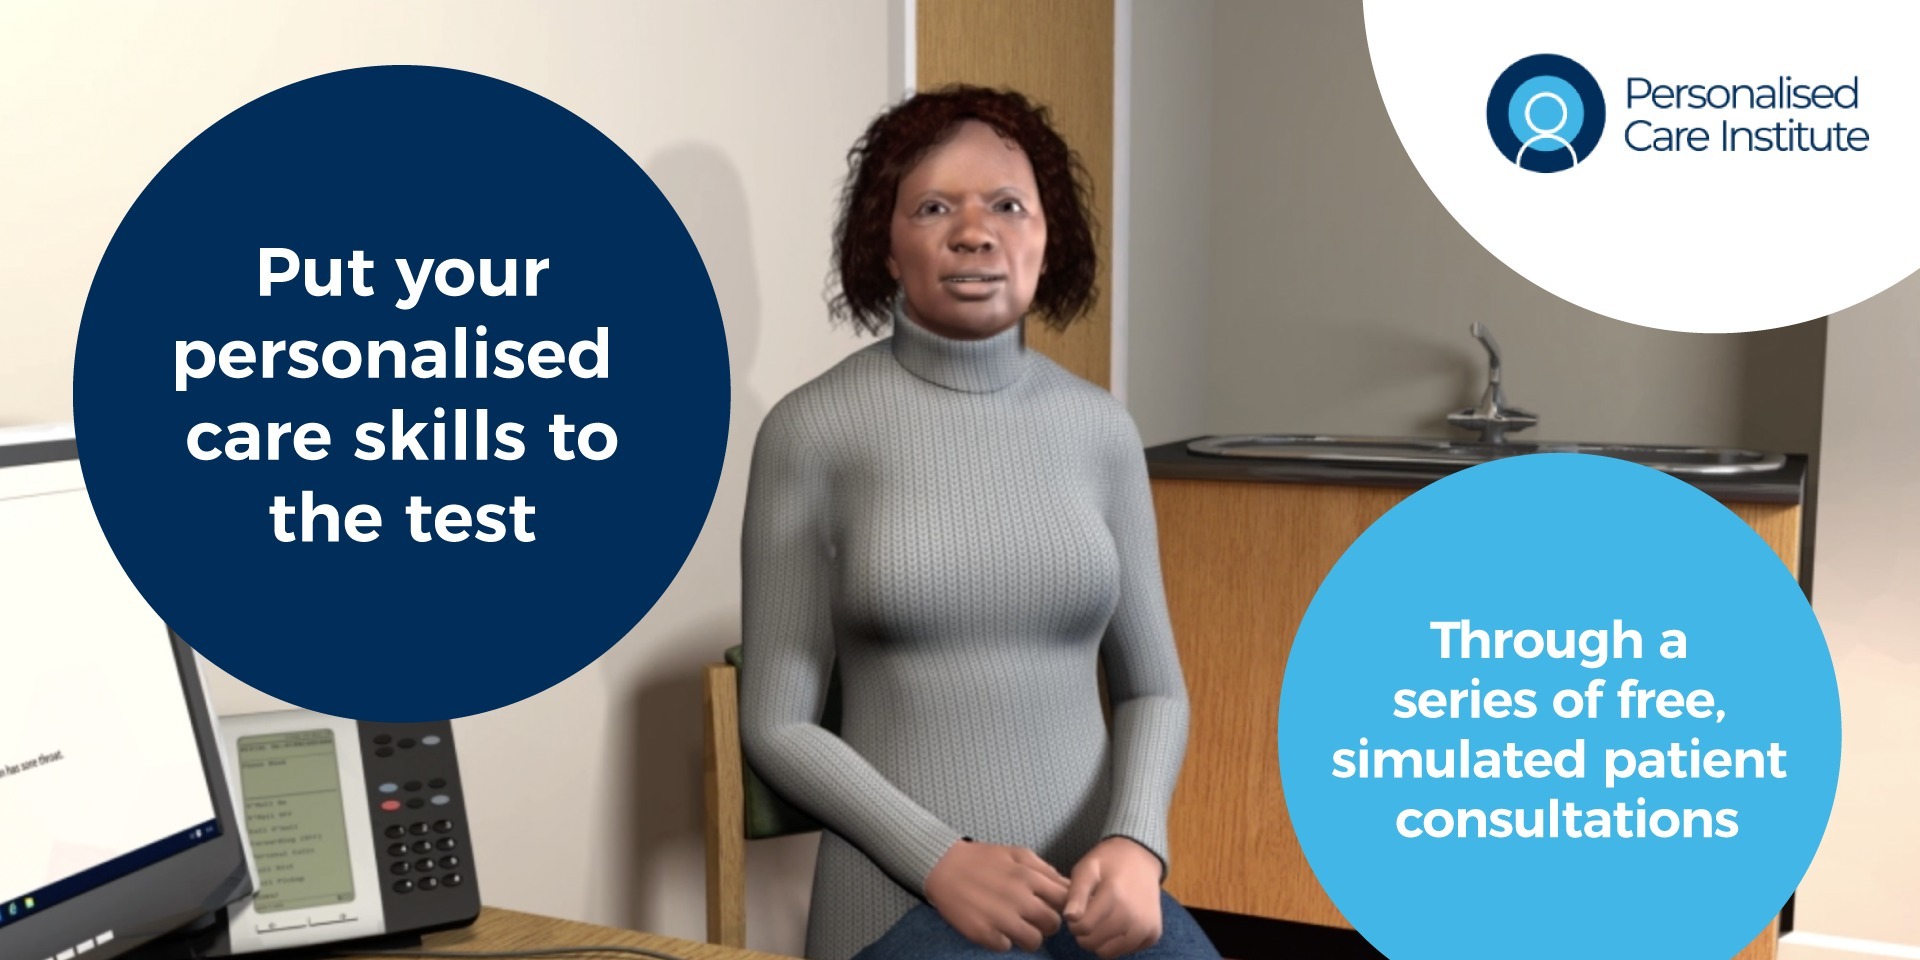 Put your personalised care skills to the test through a series of free, simulated patient consultations. By the Personalised Care Institute.